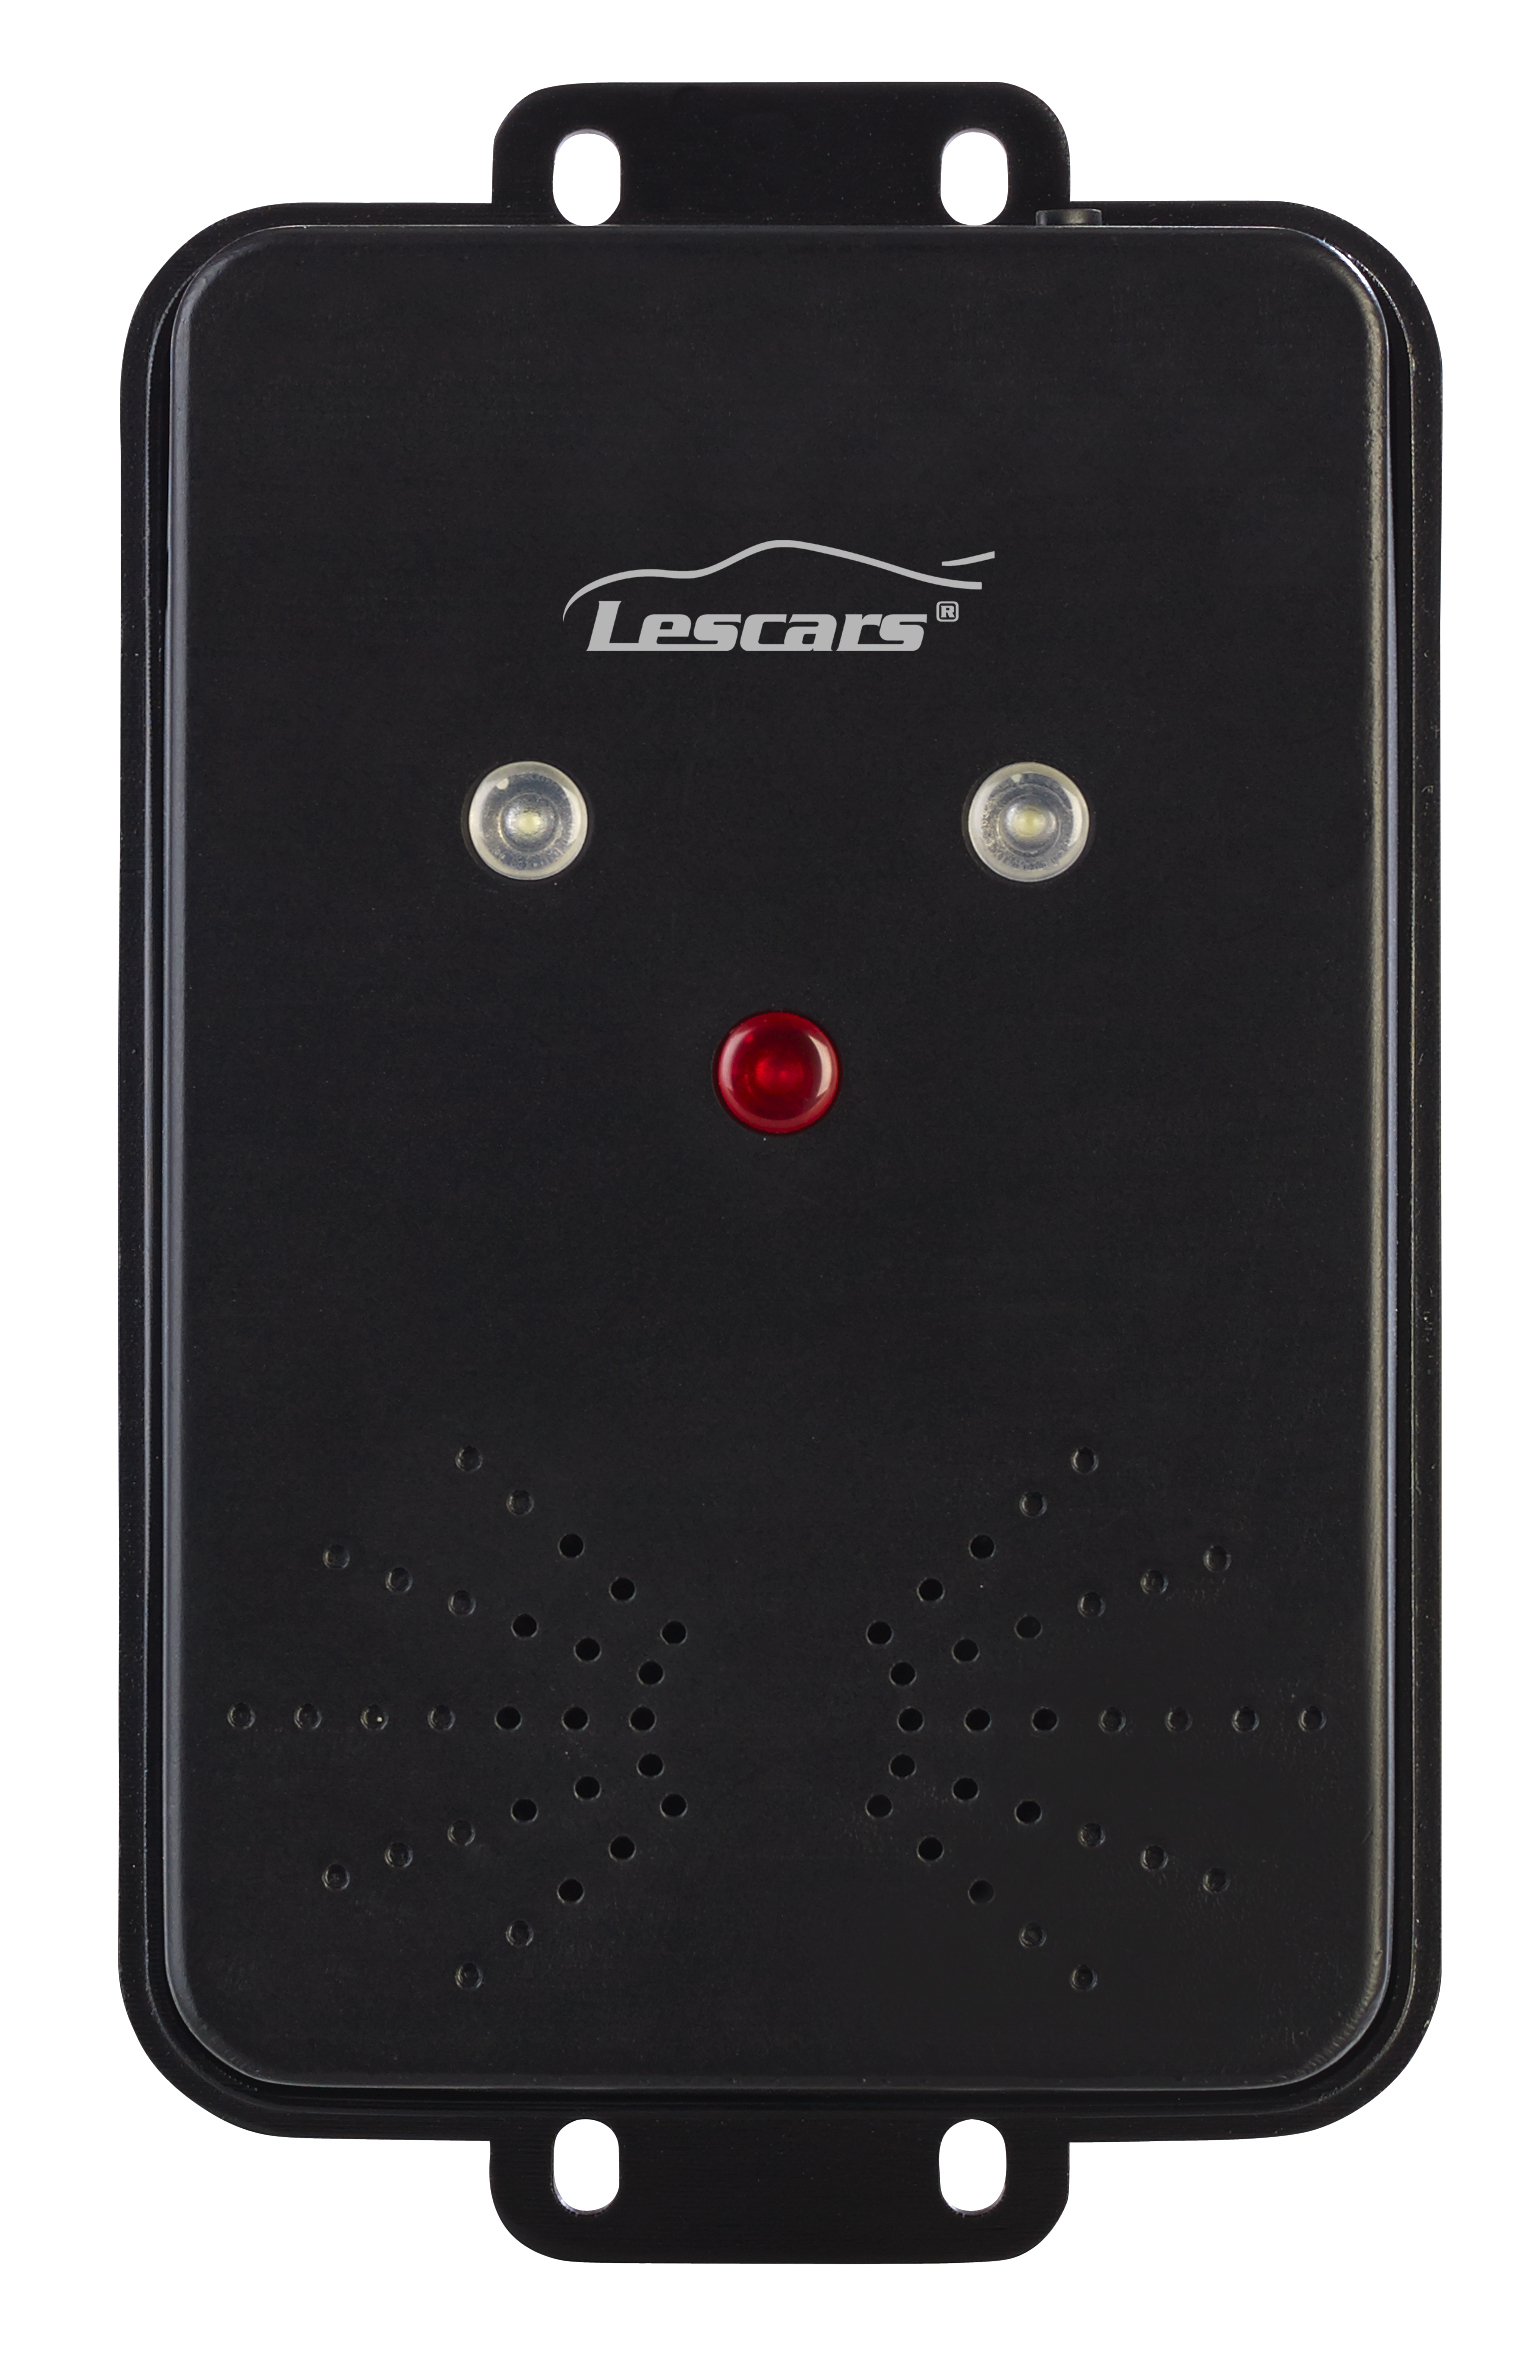 Lescars Mobiles 3in1-Hochfrequenz-Marder-Abwehrgerät, 12 - 24 kHz, 80 dB,  PEARL GmbH, Story - lifePR